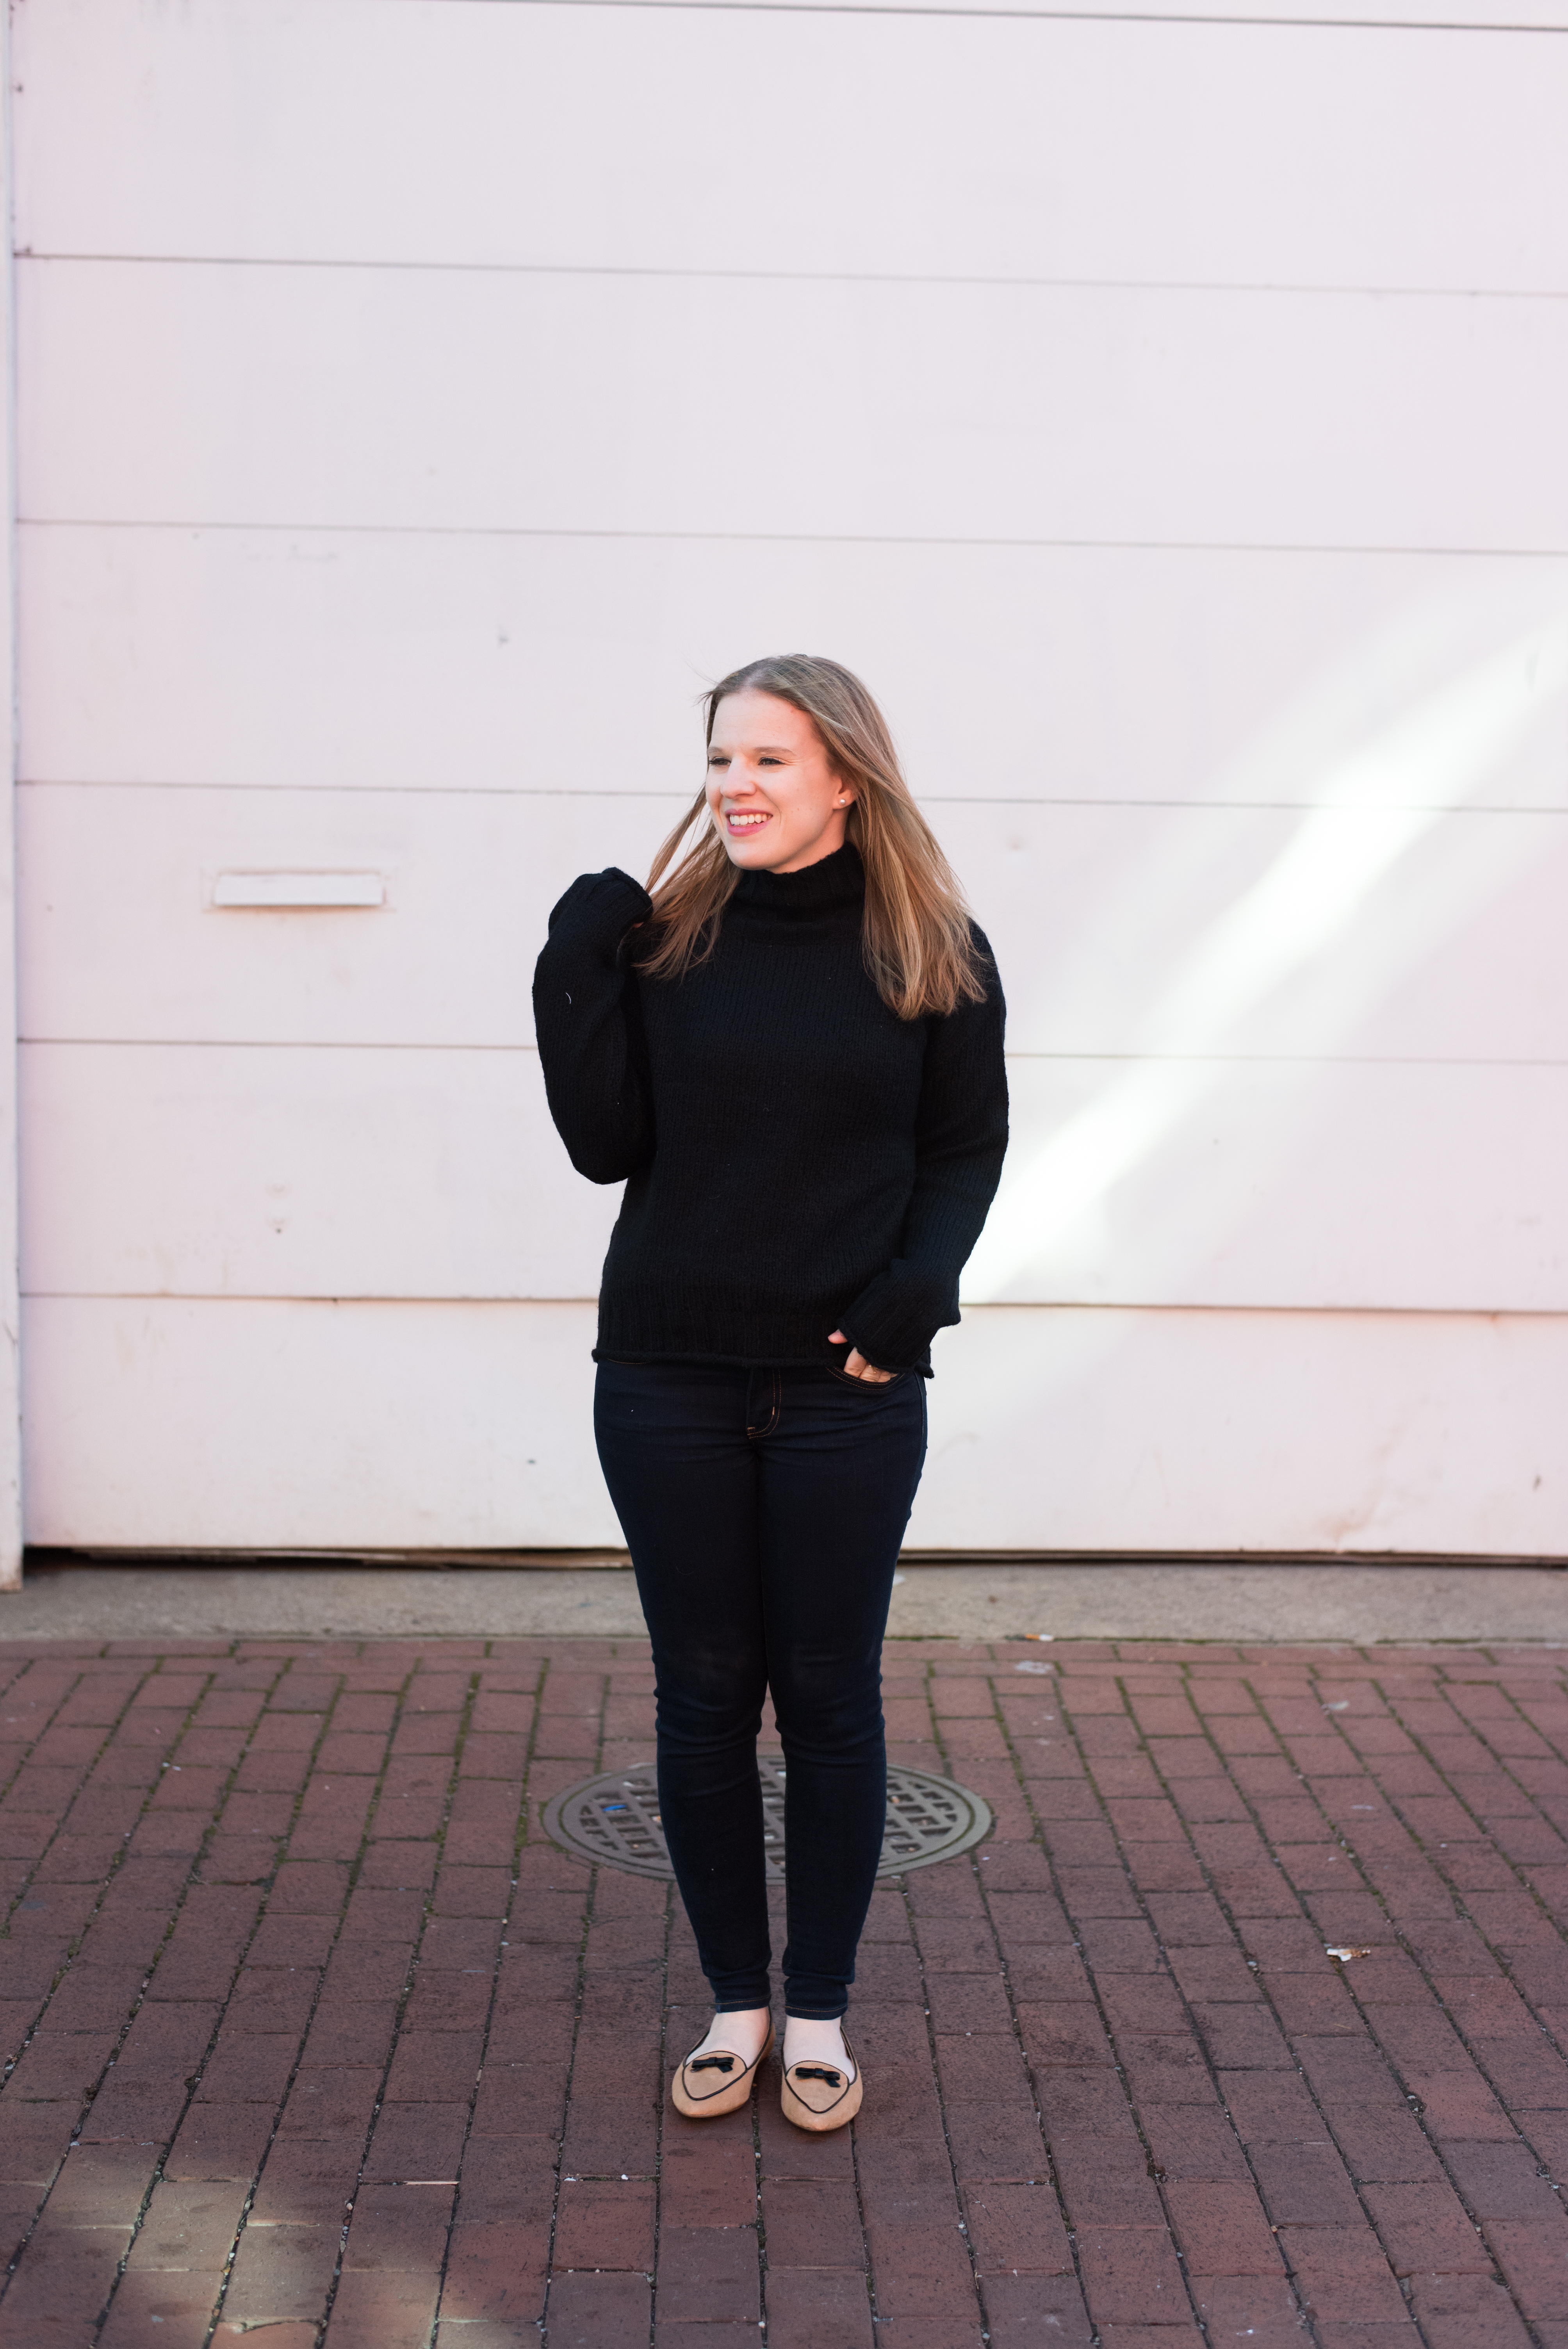 What I'm Already Doing to Implement My Word of the Year | Something Good, @Danaerinw , women, fashion, clothing, style, winter outfits, inspiration, cold weather looks, winter fashion, cold weather style, sweater, black sweater, talbots, dark wash jeans, DC style blogger